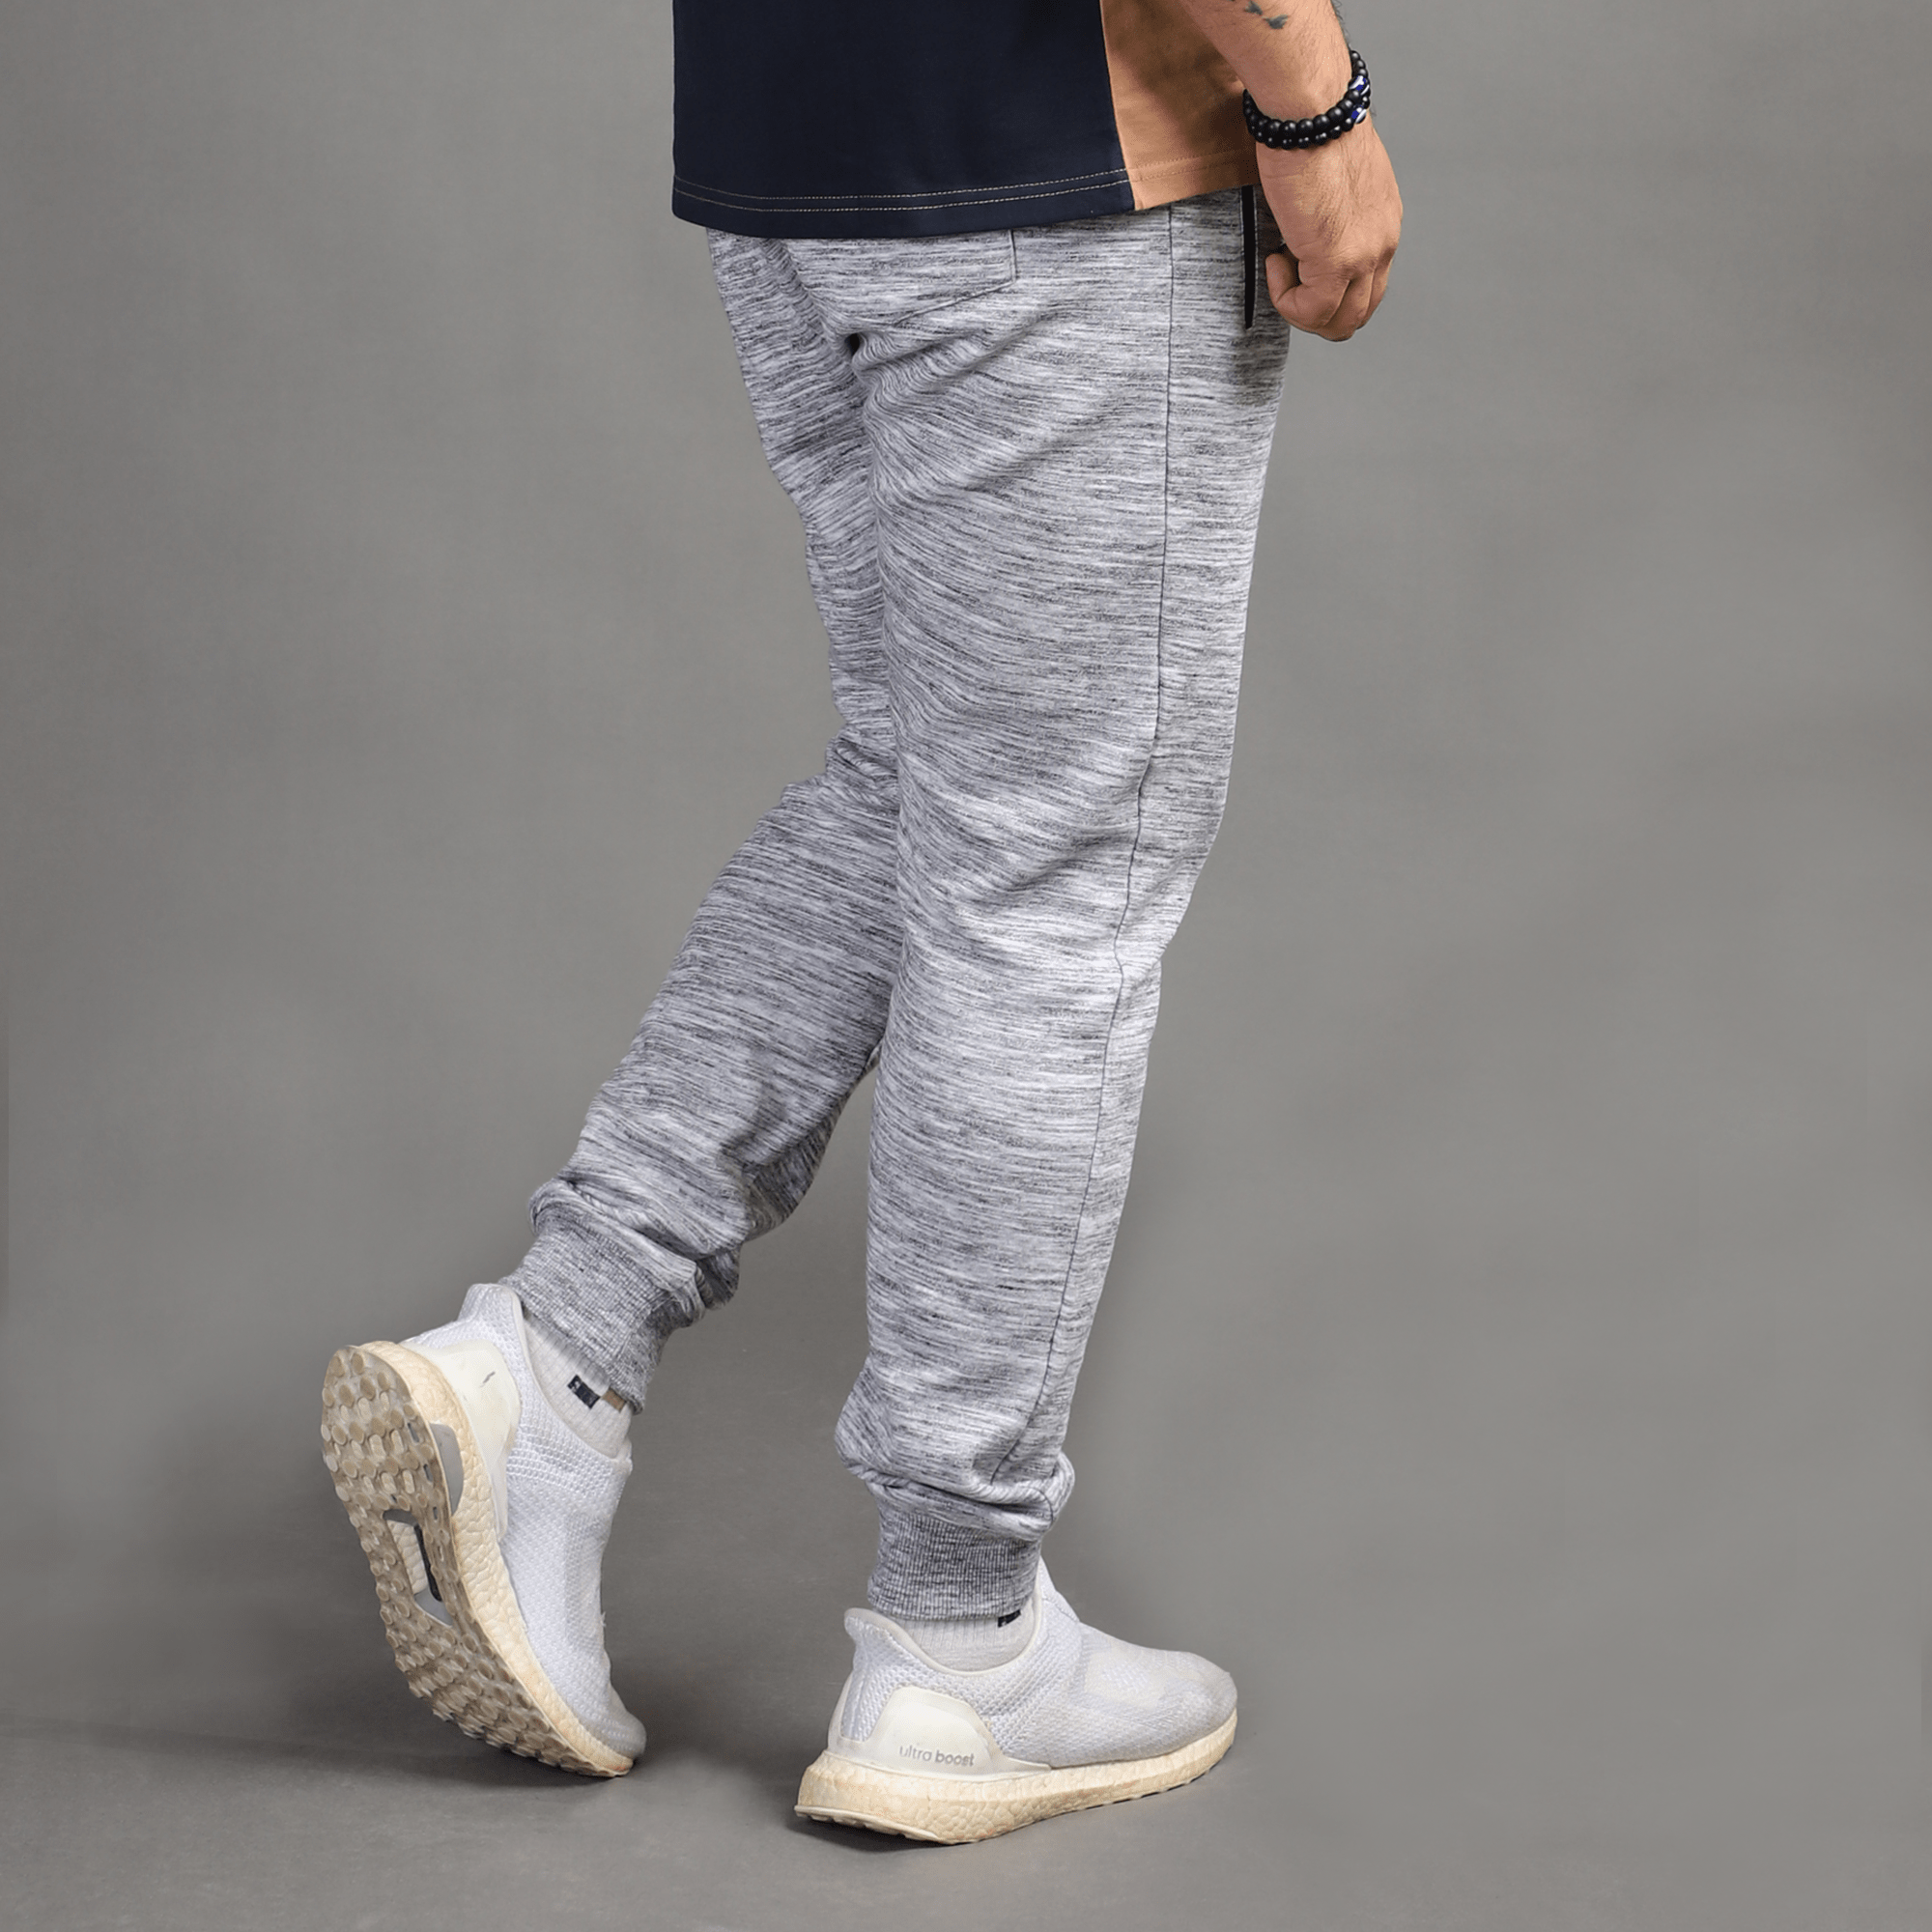 Lv White Gray Joggers Best Price In Pakistan, Rs 4800